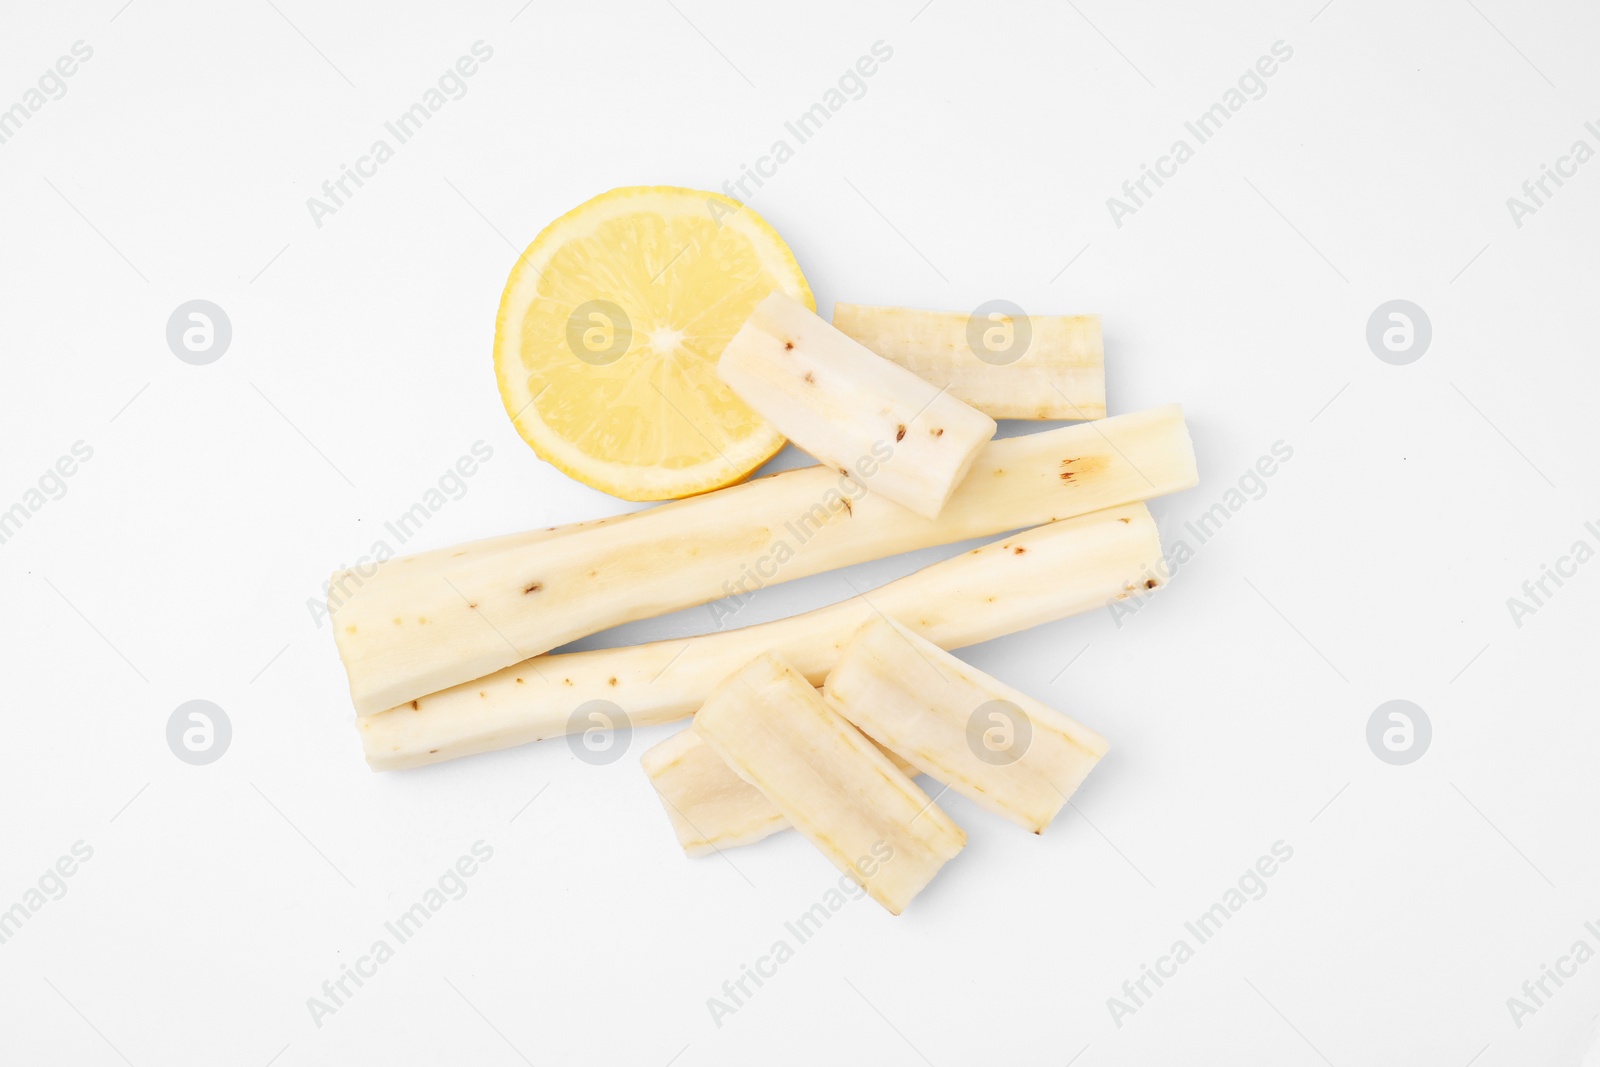 Photo of Cut raw salsify roots and lemon on white background, flat lay